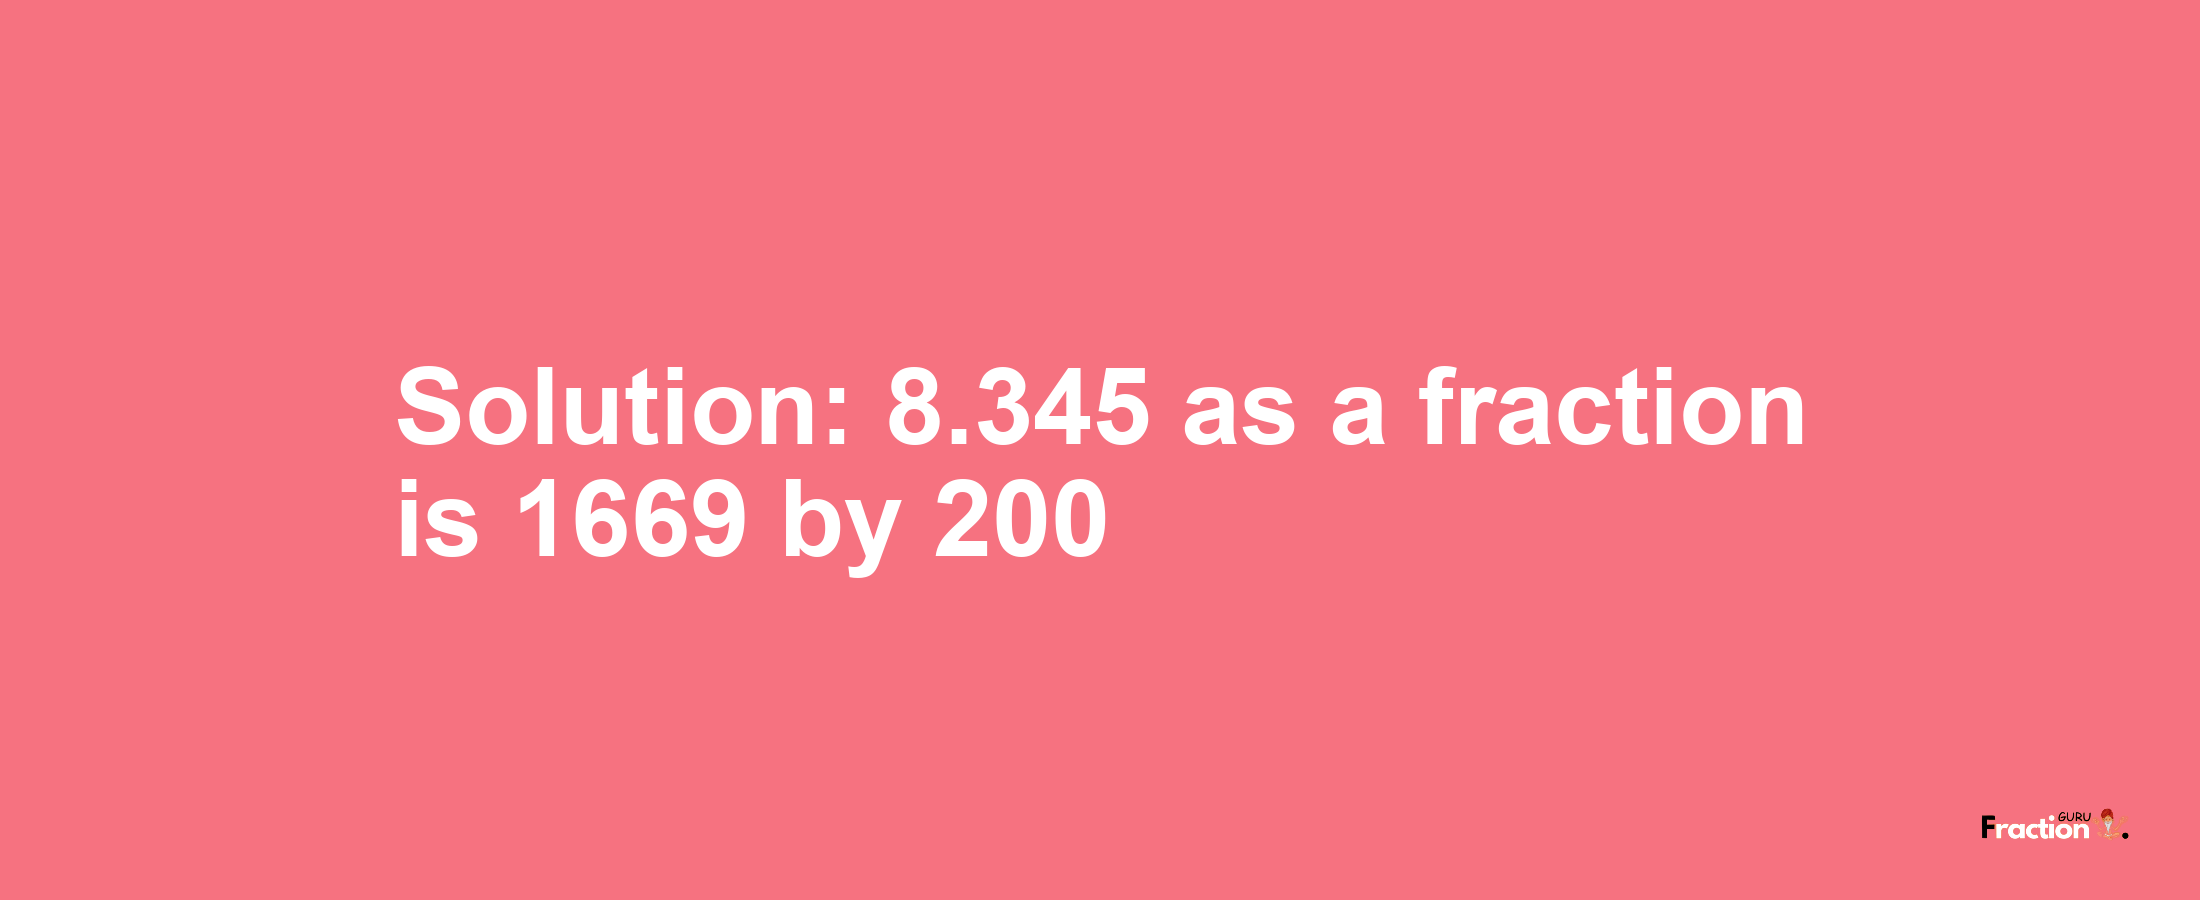 Solution:8.345 as a fraction is 1669/200